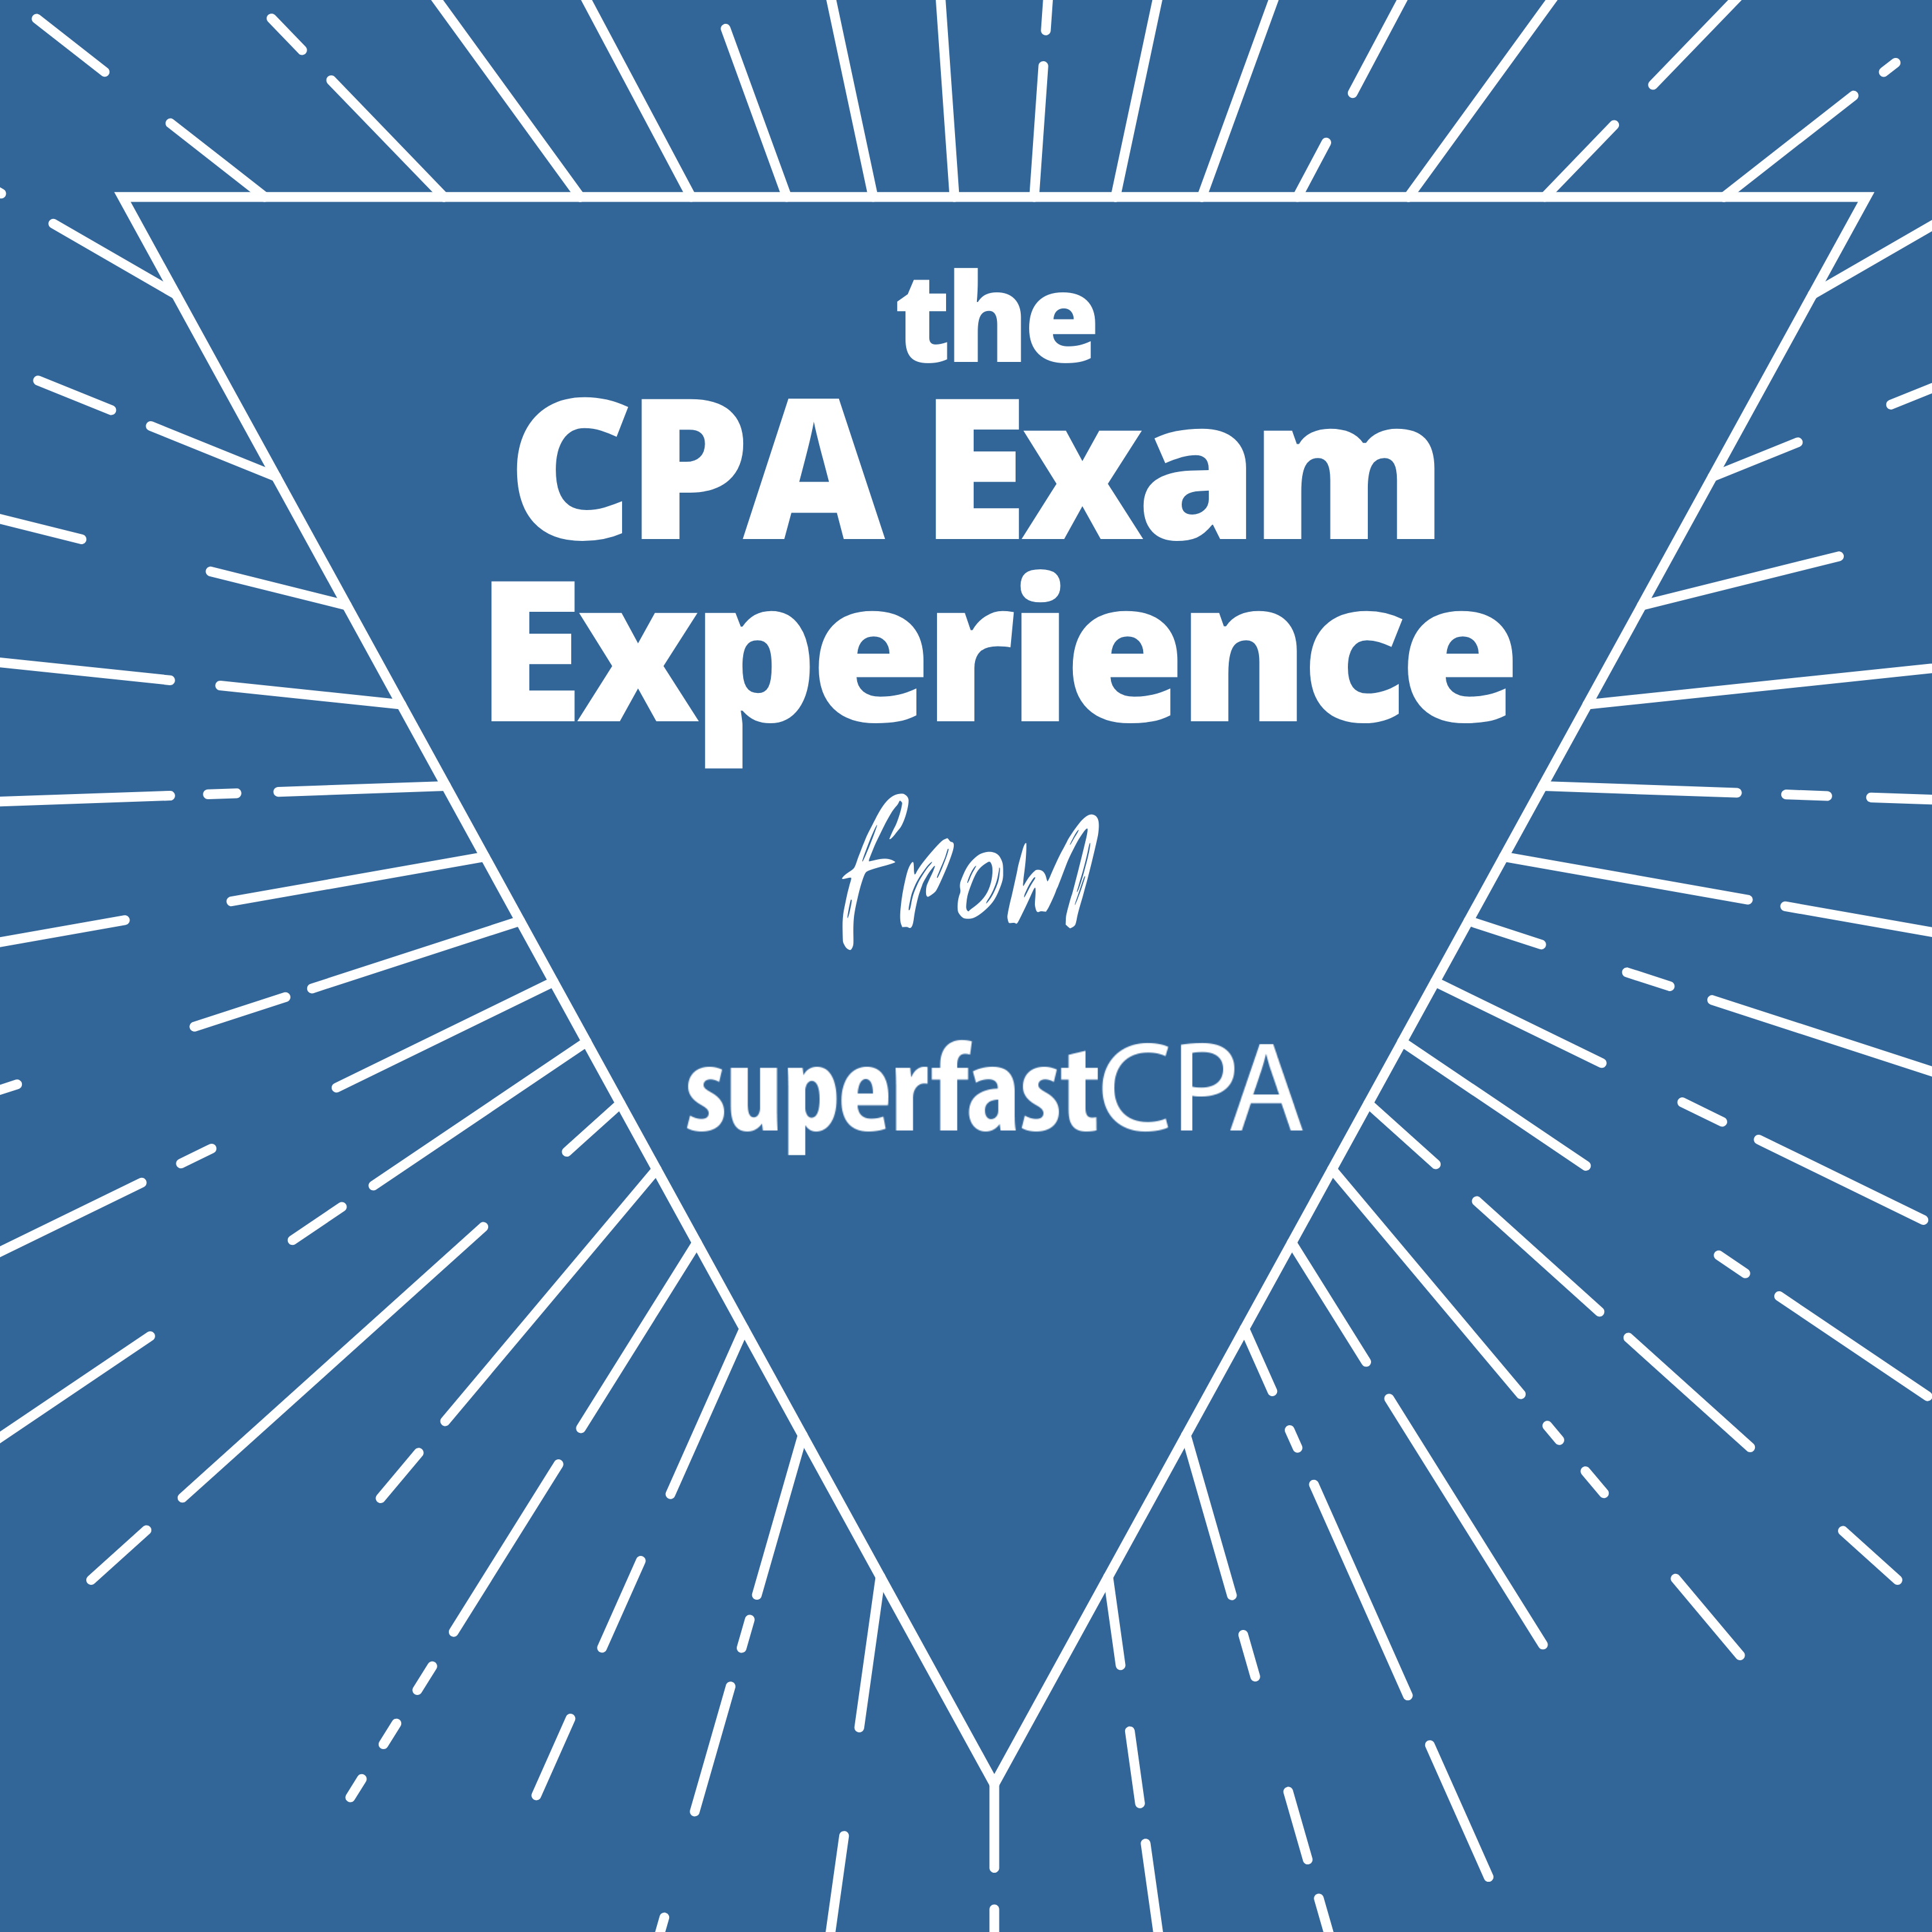 Artwork for podcast CPA Exam Experience from SuperfastCPA